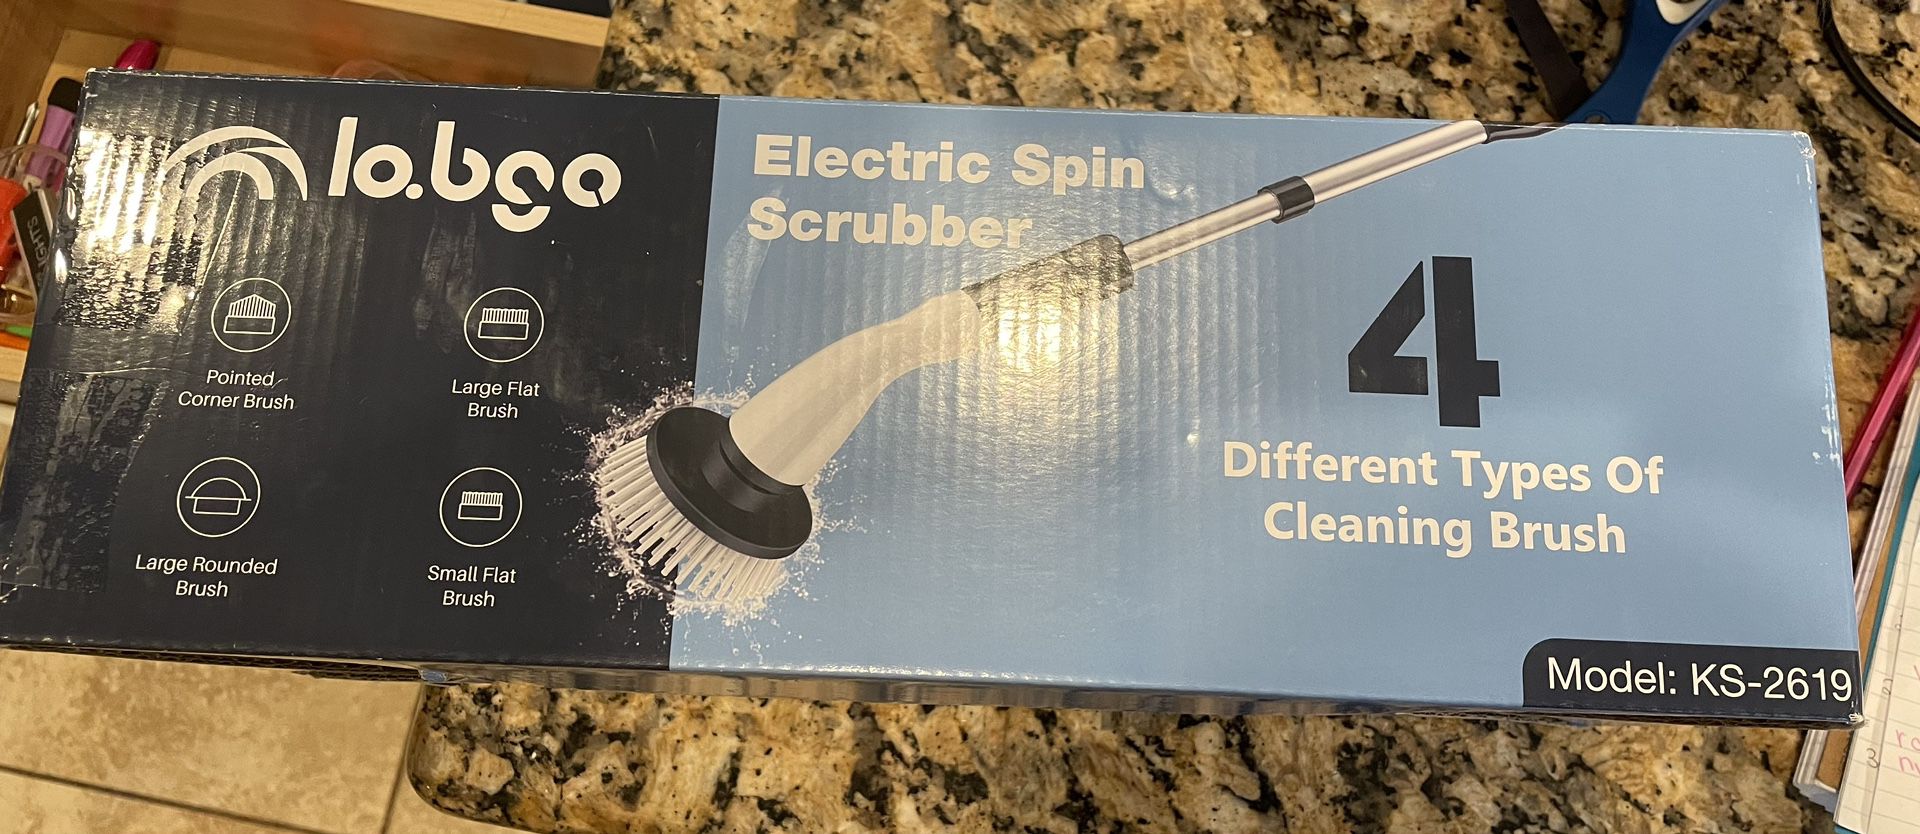 Electric Spin Scrubber 